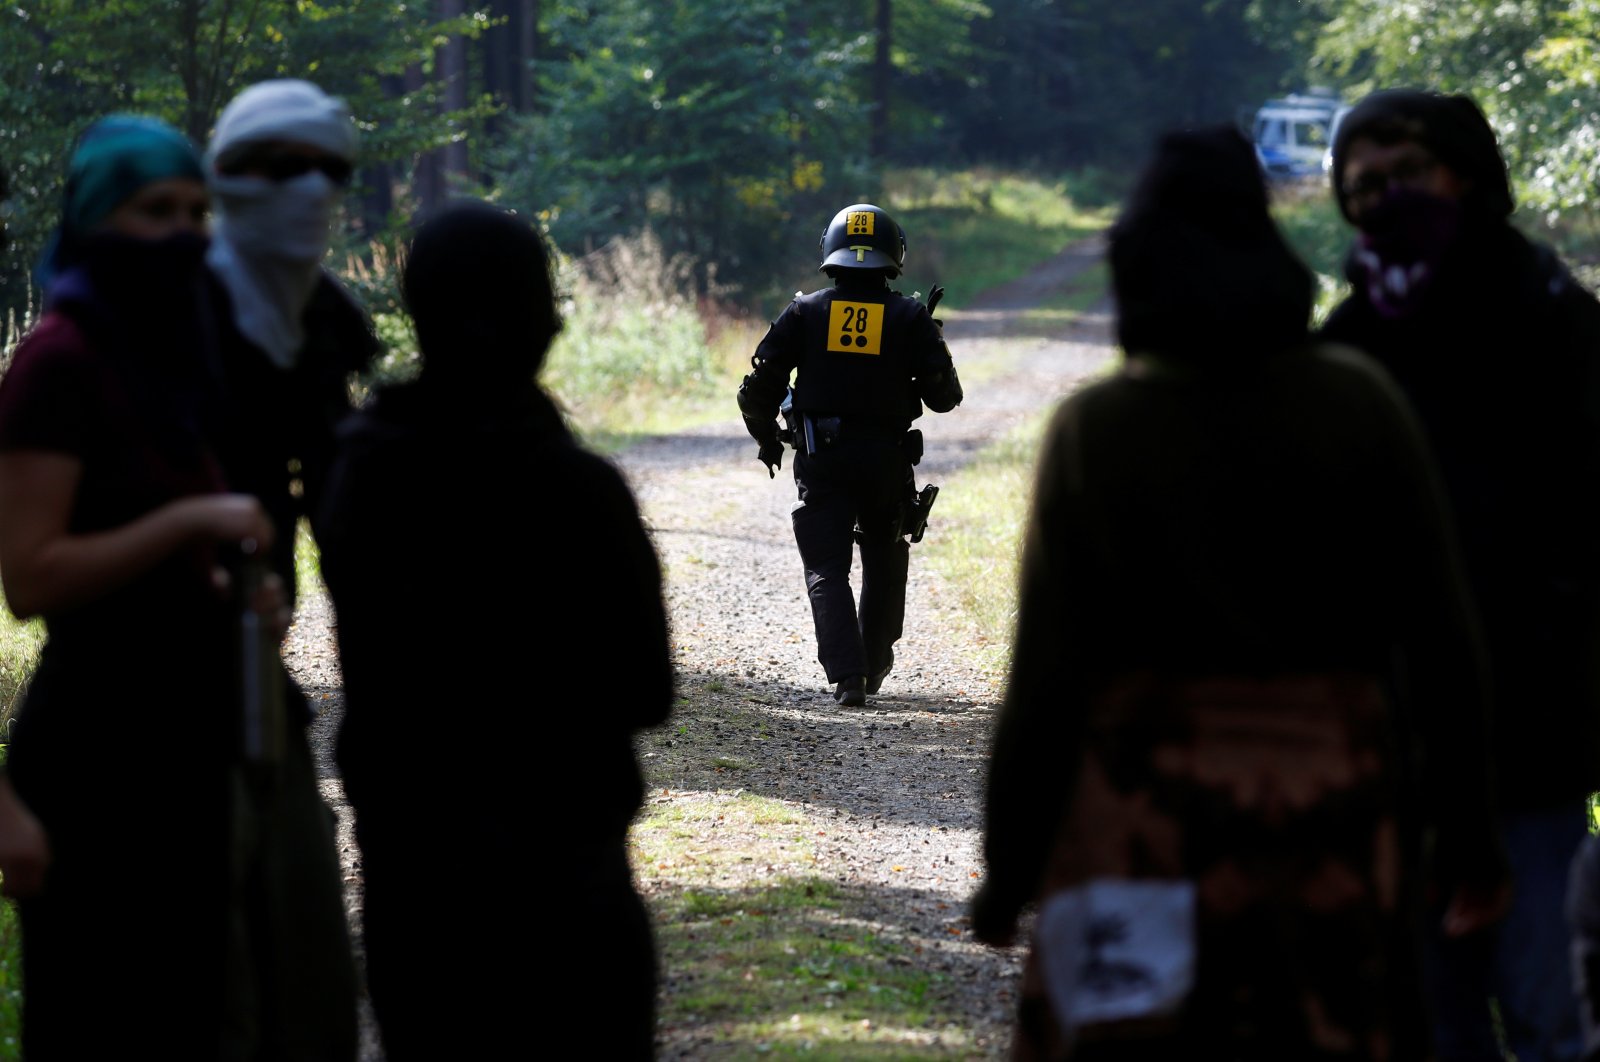 A police officer walks as the police and forest workers clear a camp at the Dannenrod forest during a protest of environmentalists against the extension of the highway Autobahn 49, in Dannenrod, Germany, Sept. 16, 2020. (Reuters Photo)